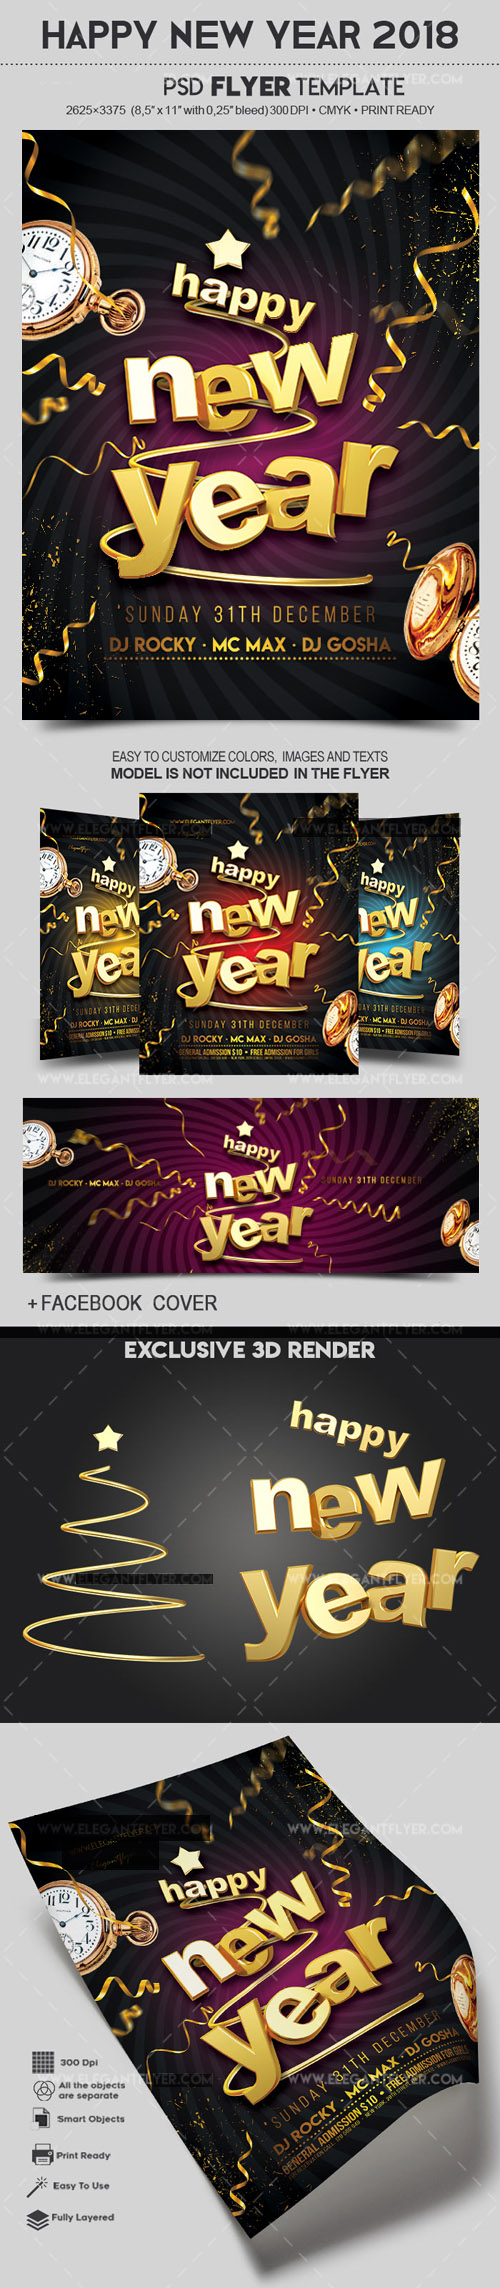 Happy New Year 2018 Flyer PSD Template (+ Facebook Cover)